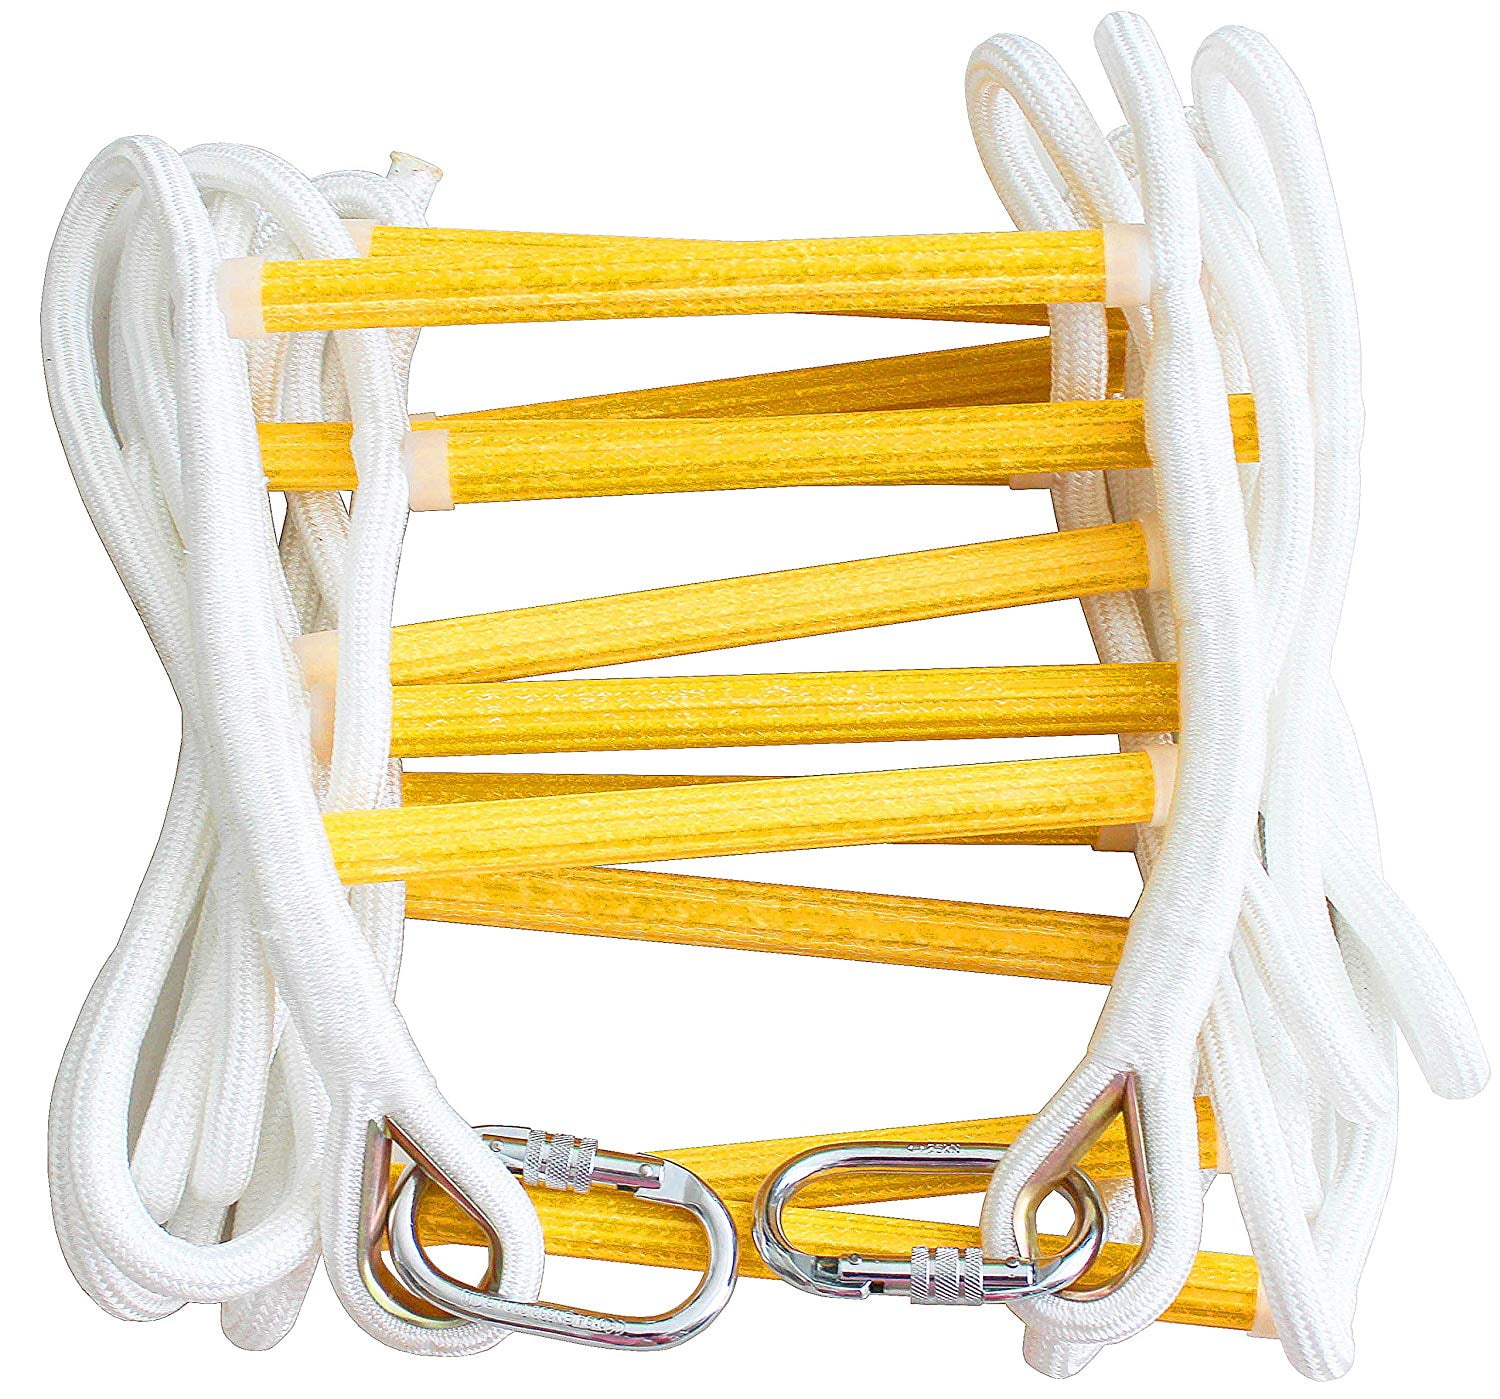 ISOP Emergency Fire Escape Rope Ladder 2 Story 16ft with